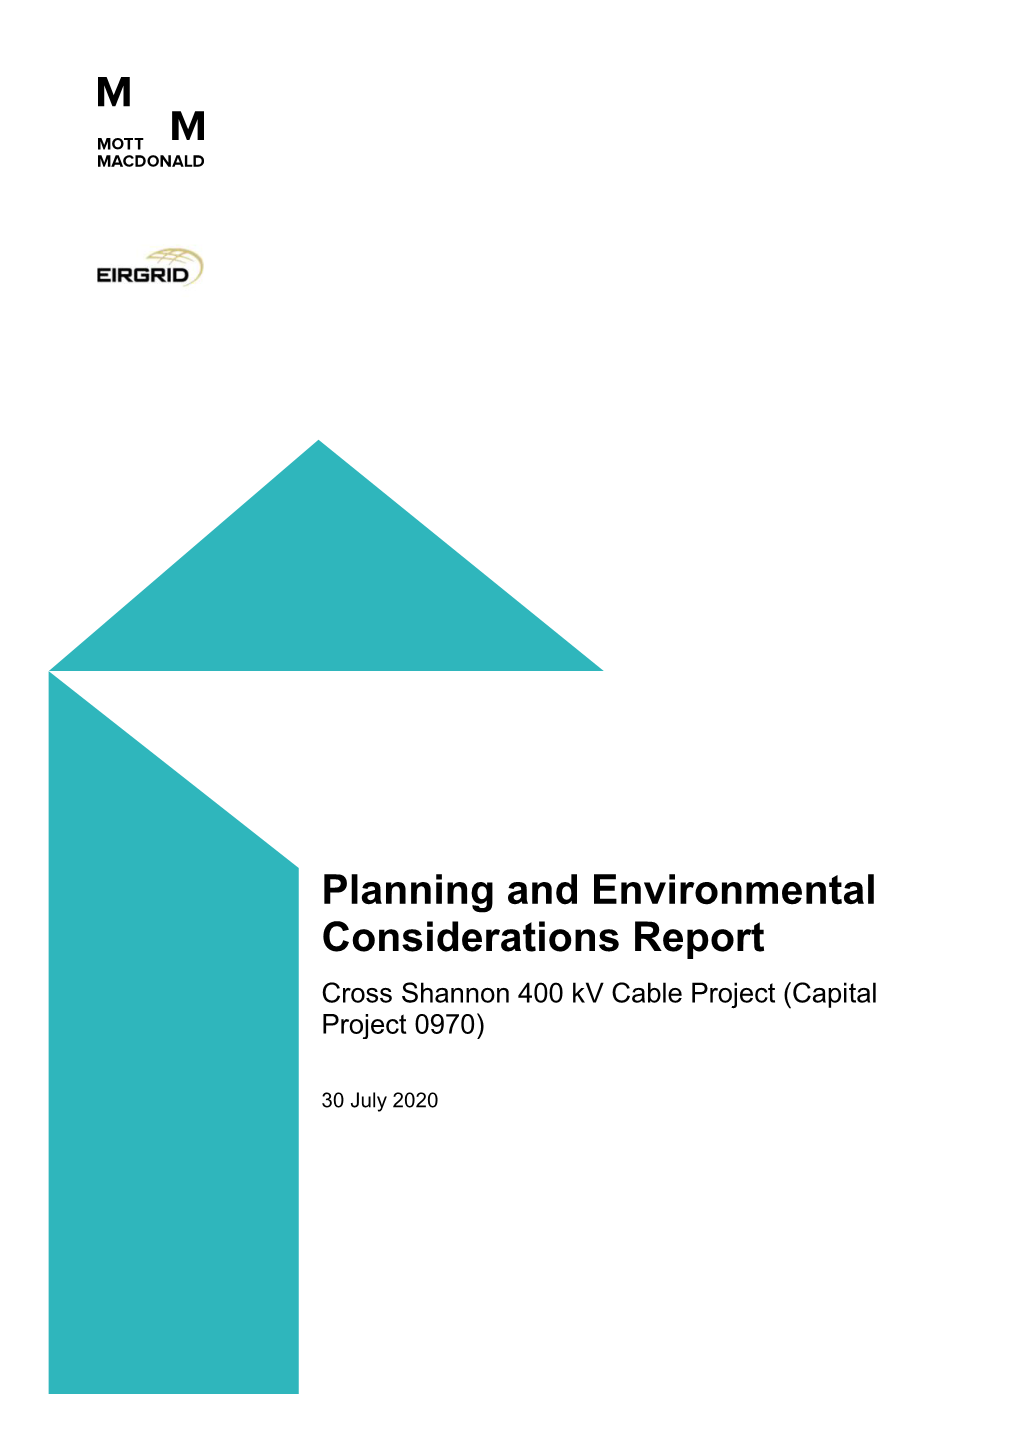 Planning and Environmental Considerations Report Cross Shannon 400 Kv Cable Project (Capital Project 0970)